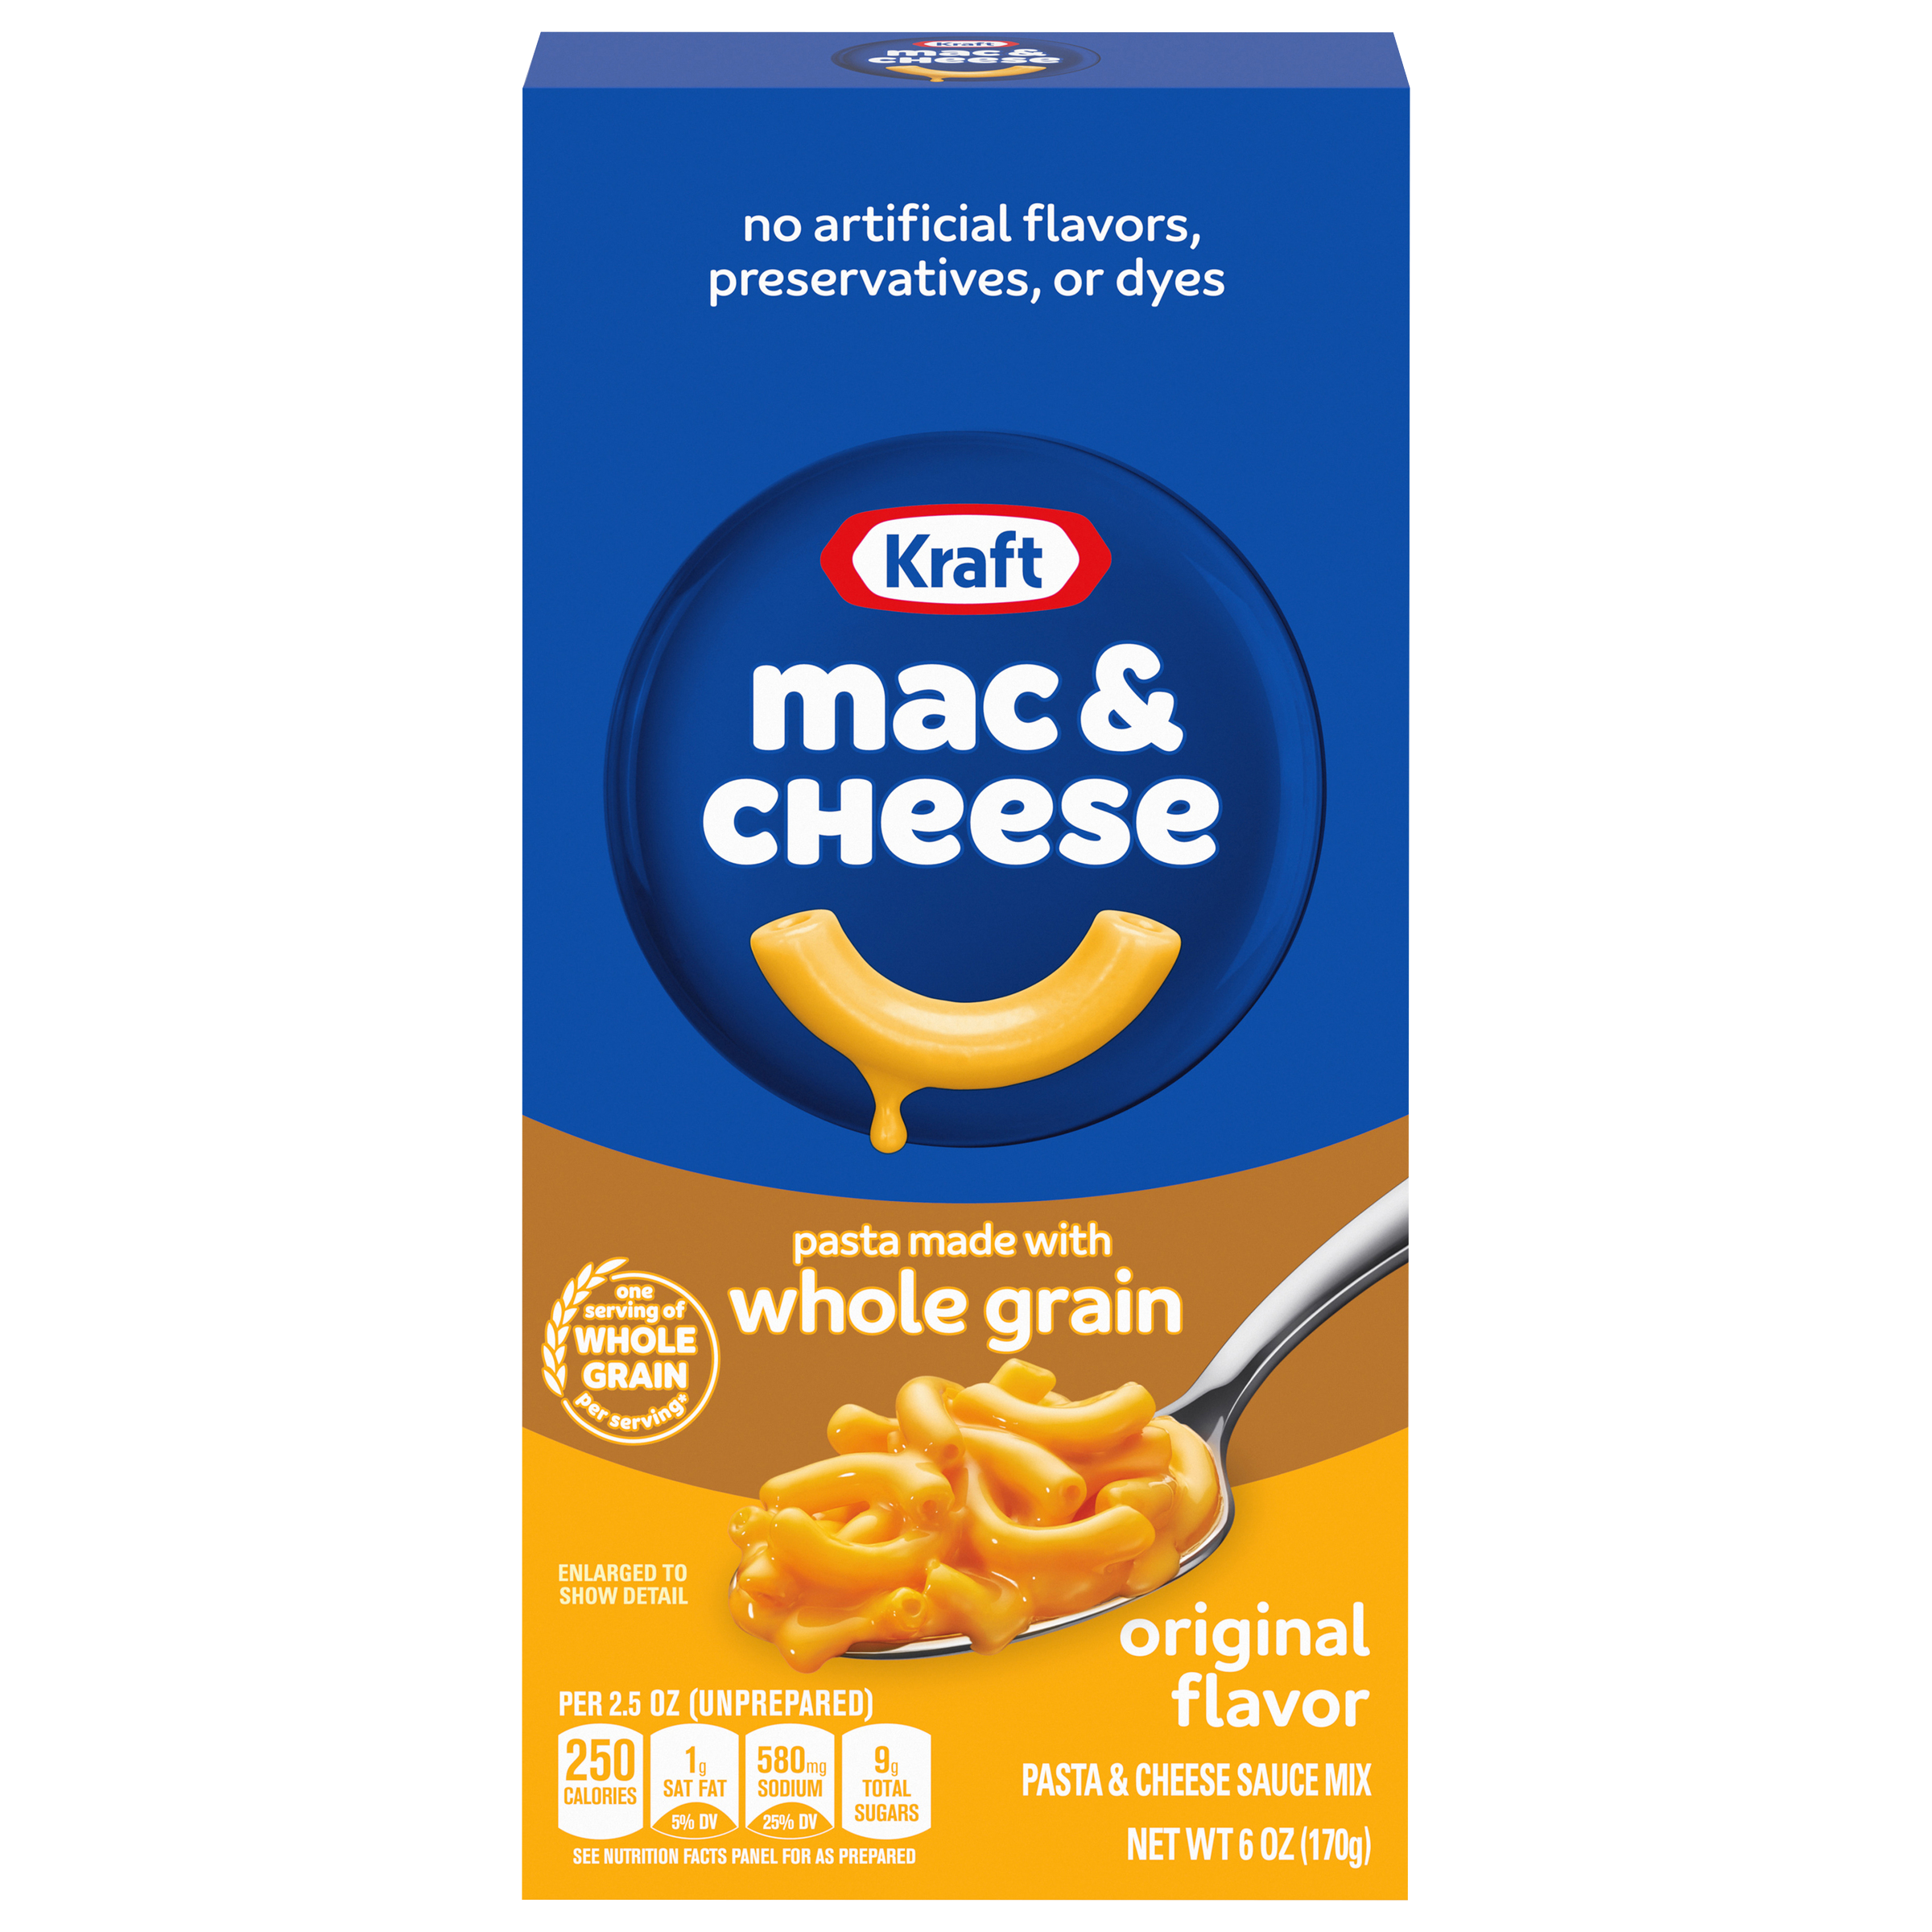 http://cdn.allotta.io/image/upload/v1693835714/dxp-images/kmc/products/original-mac--cheese-macaroni-and-cheese-dinner-with-whole-grain-pasta-00021000017218-en-US.png